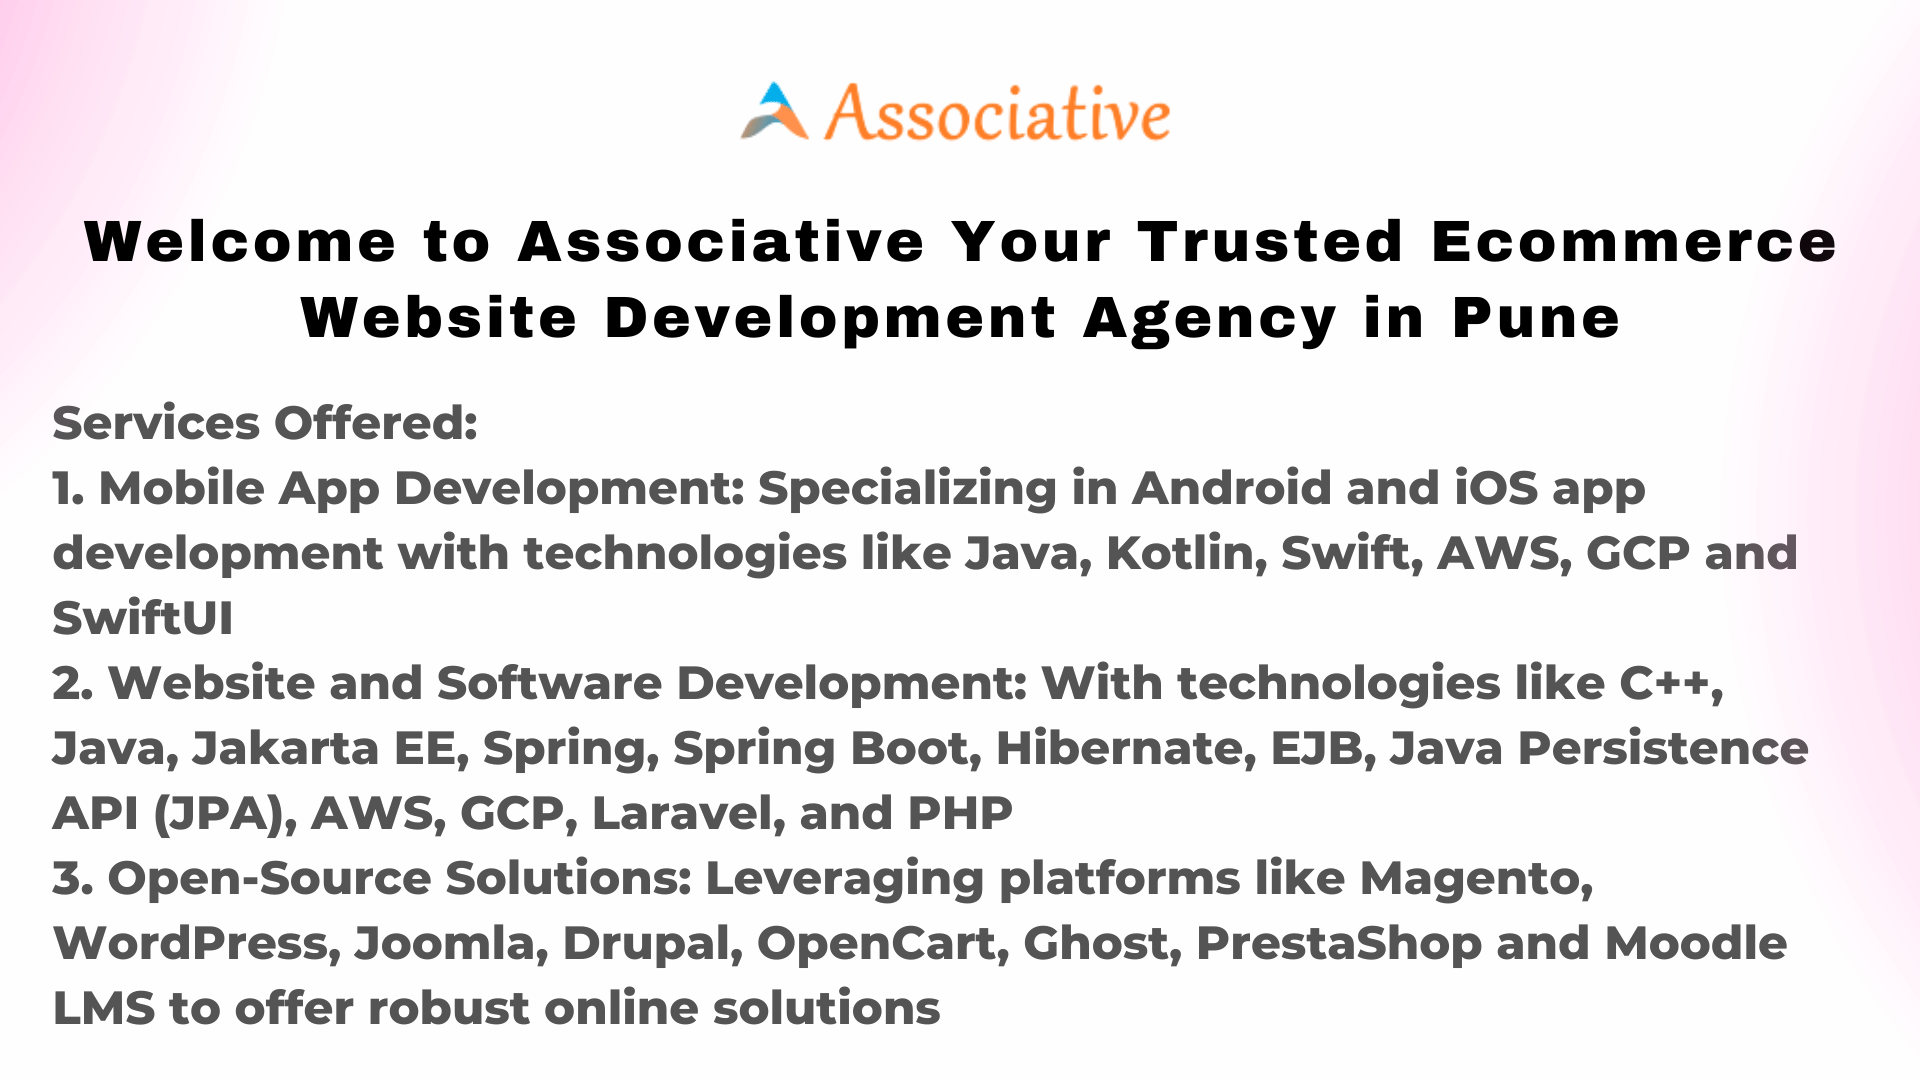 Welcome to Associative Your Trusted Ecommerce Website Development Agency in Pune